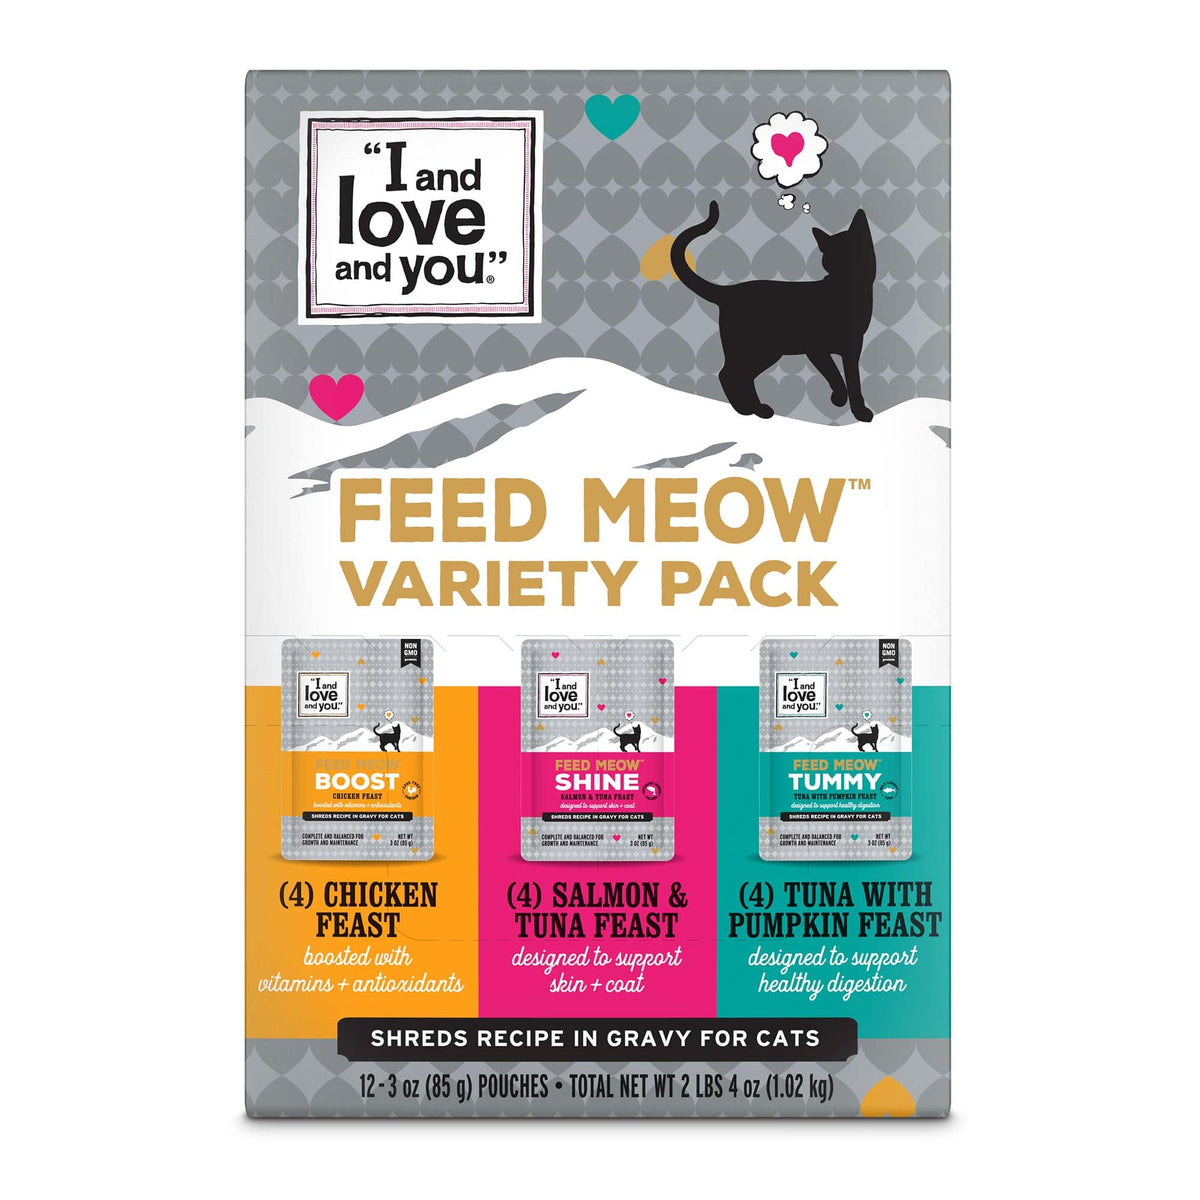 Feed Meow Variety Pack with cat food packages, a cat with heart pattern, a white sign, a flower, and a yellow letter O.